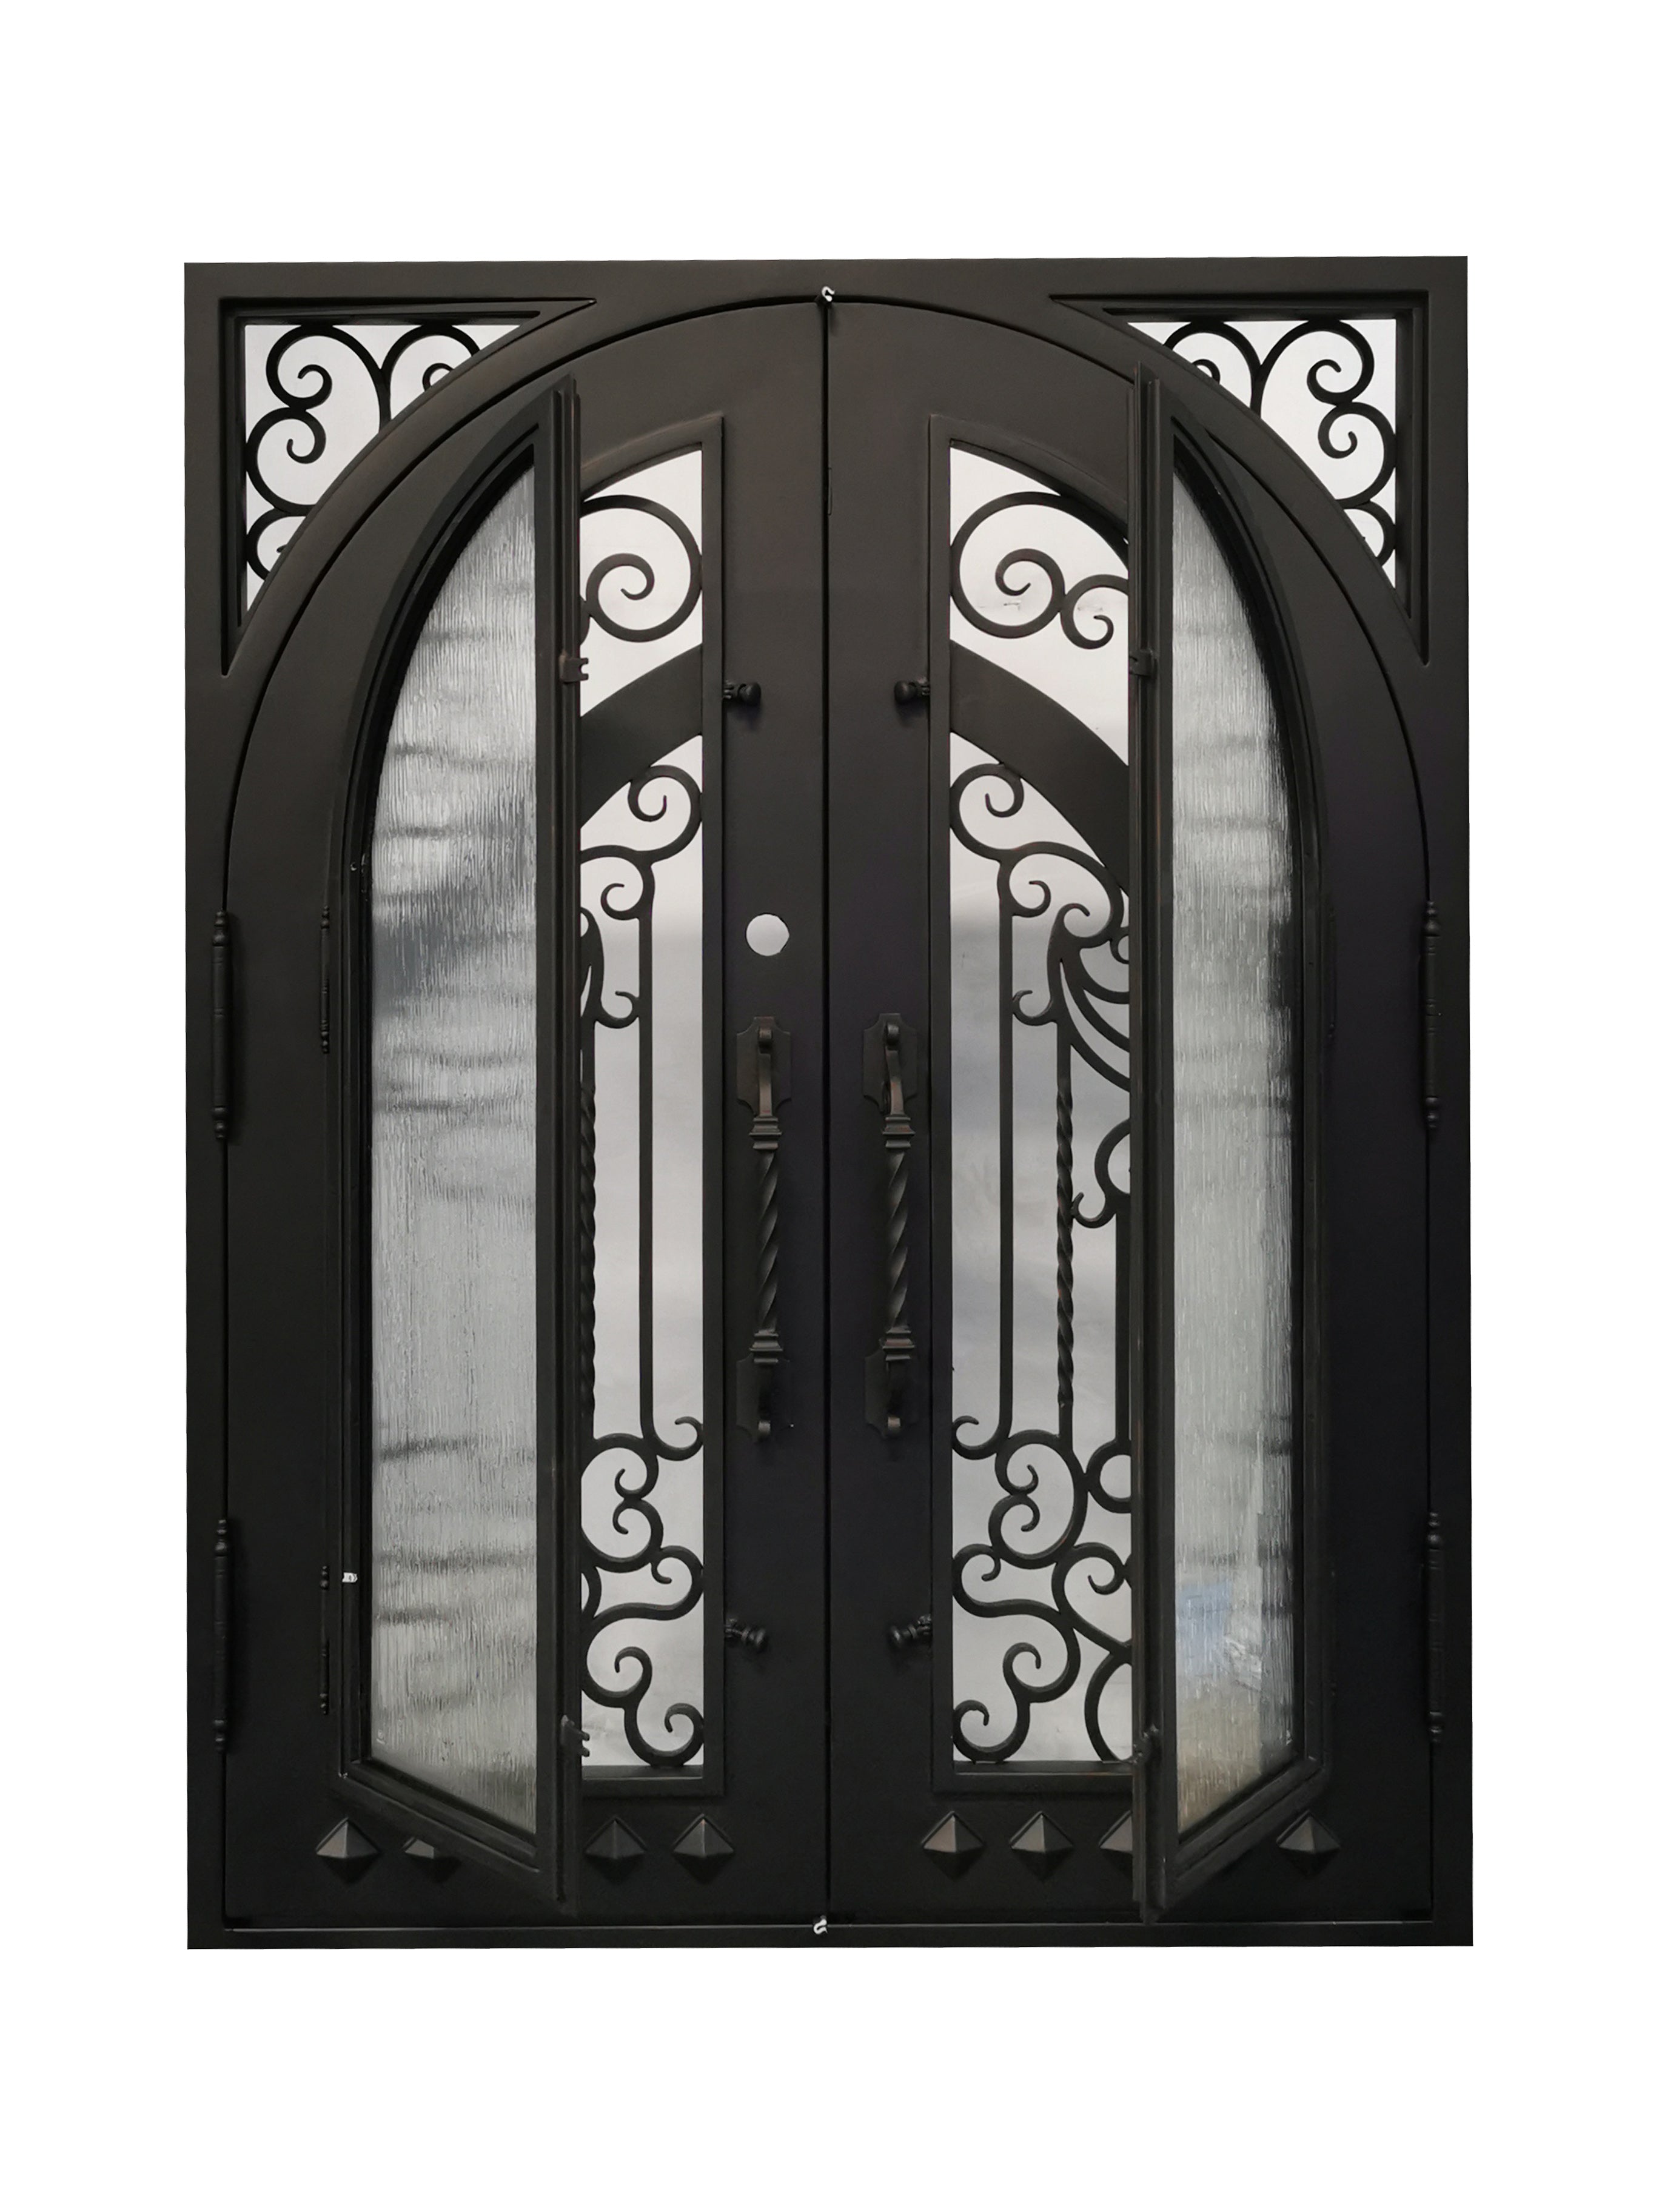 Cresson Model Double Front Entry Iron Door With Tempered Rain Glass Dark Bronze Finish - AAWAIZ IMPORTS